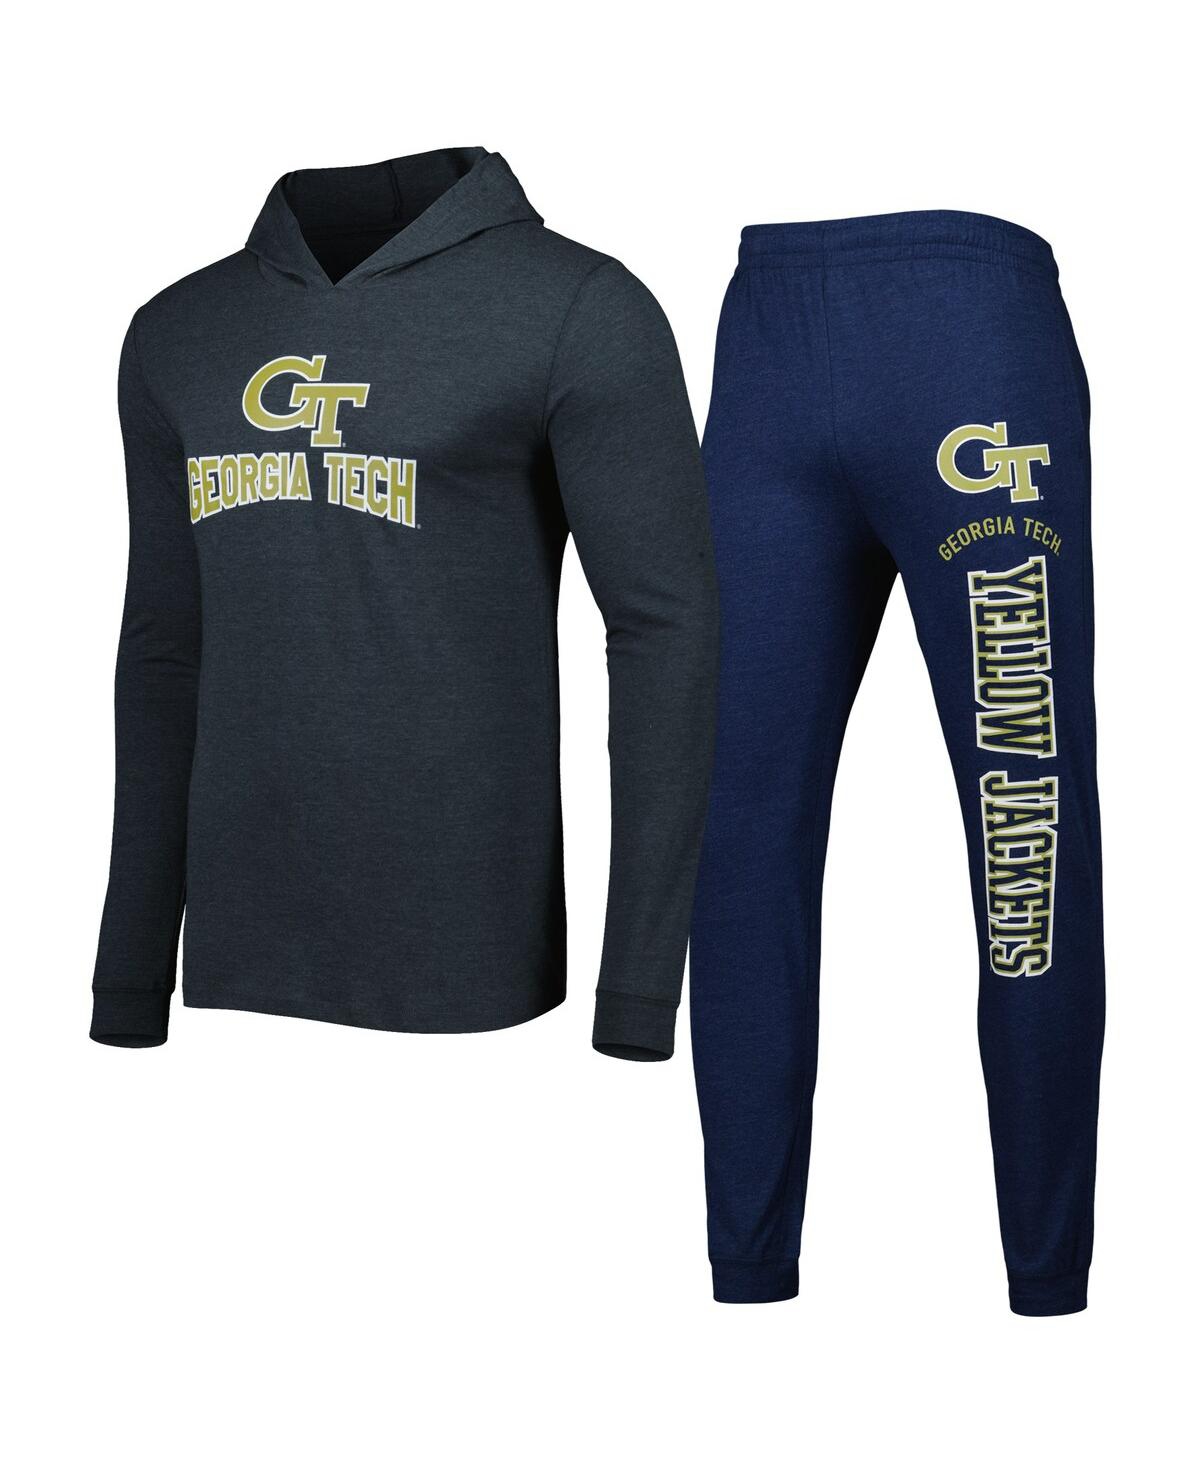 Men's Concepts Sport Navy, Charcoal Georgia Tech Yellow Jackets Meter Pullover Hoodie and Joggers Sleep Set - Navy, Charcoal